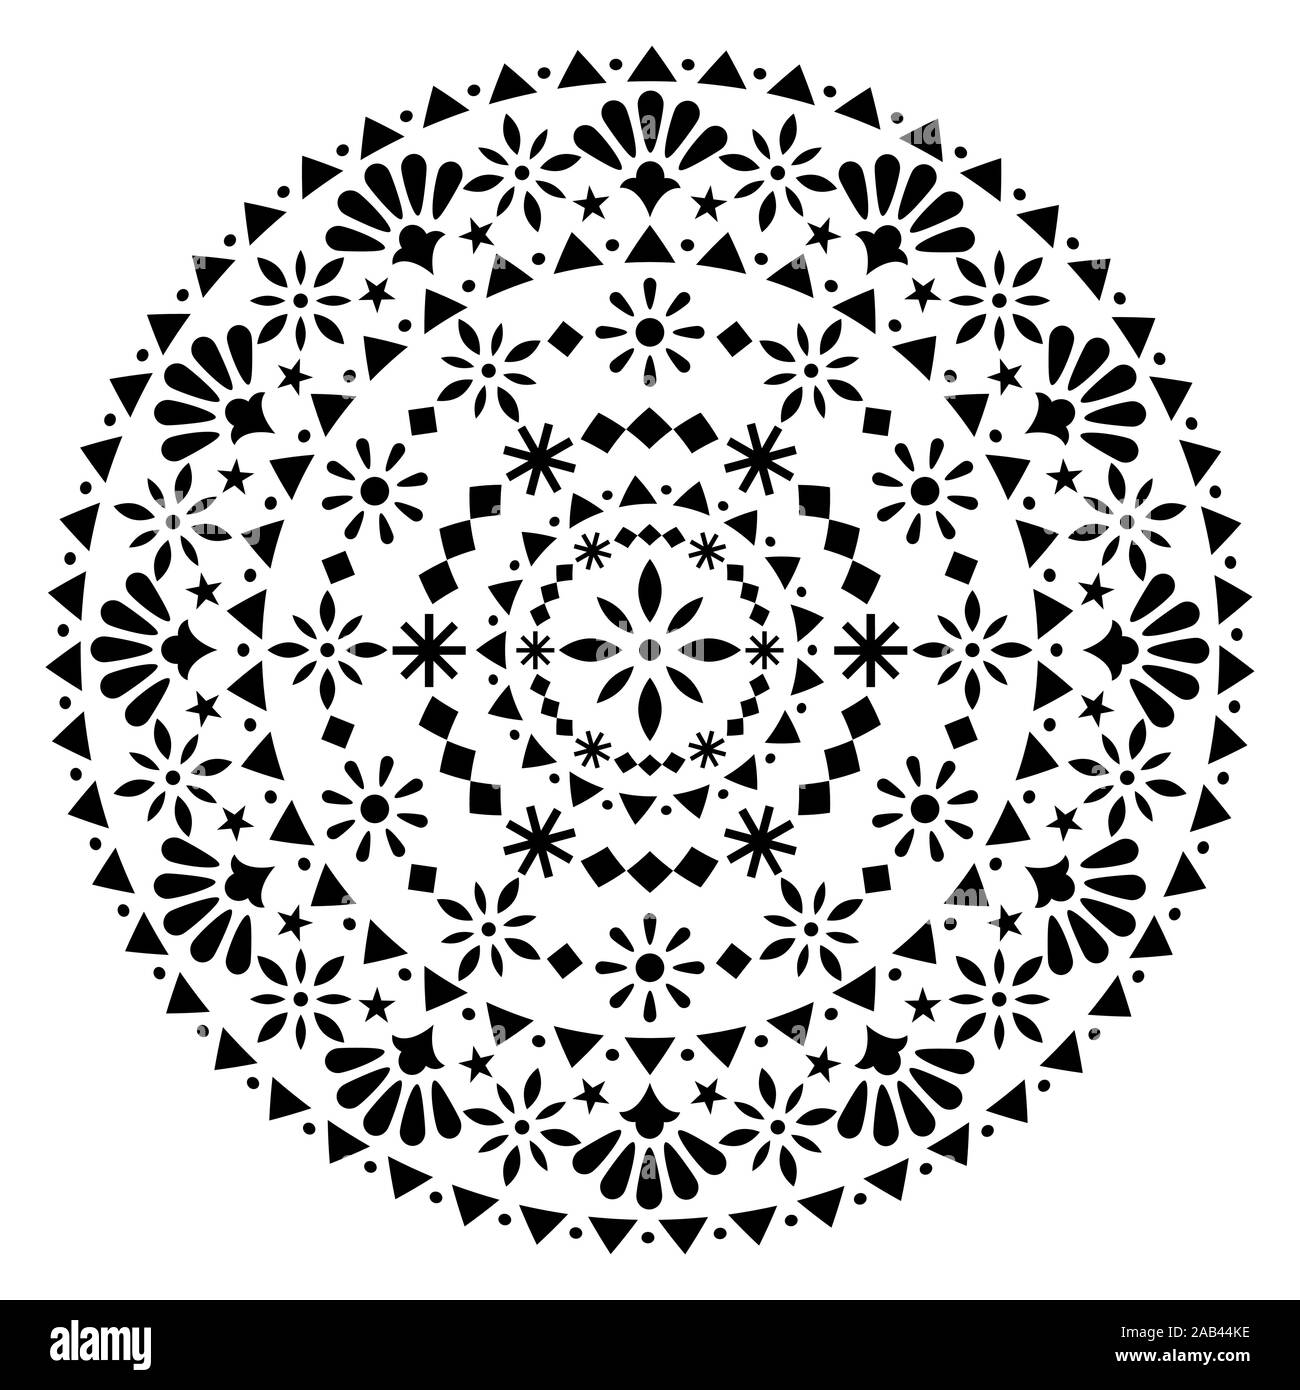 Mexican vector mandala design, monochrome folk art bohemian pattern with flowers and abstract shapes inspired by folk art from Mexico Stock Vector